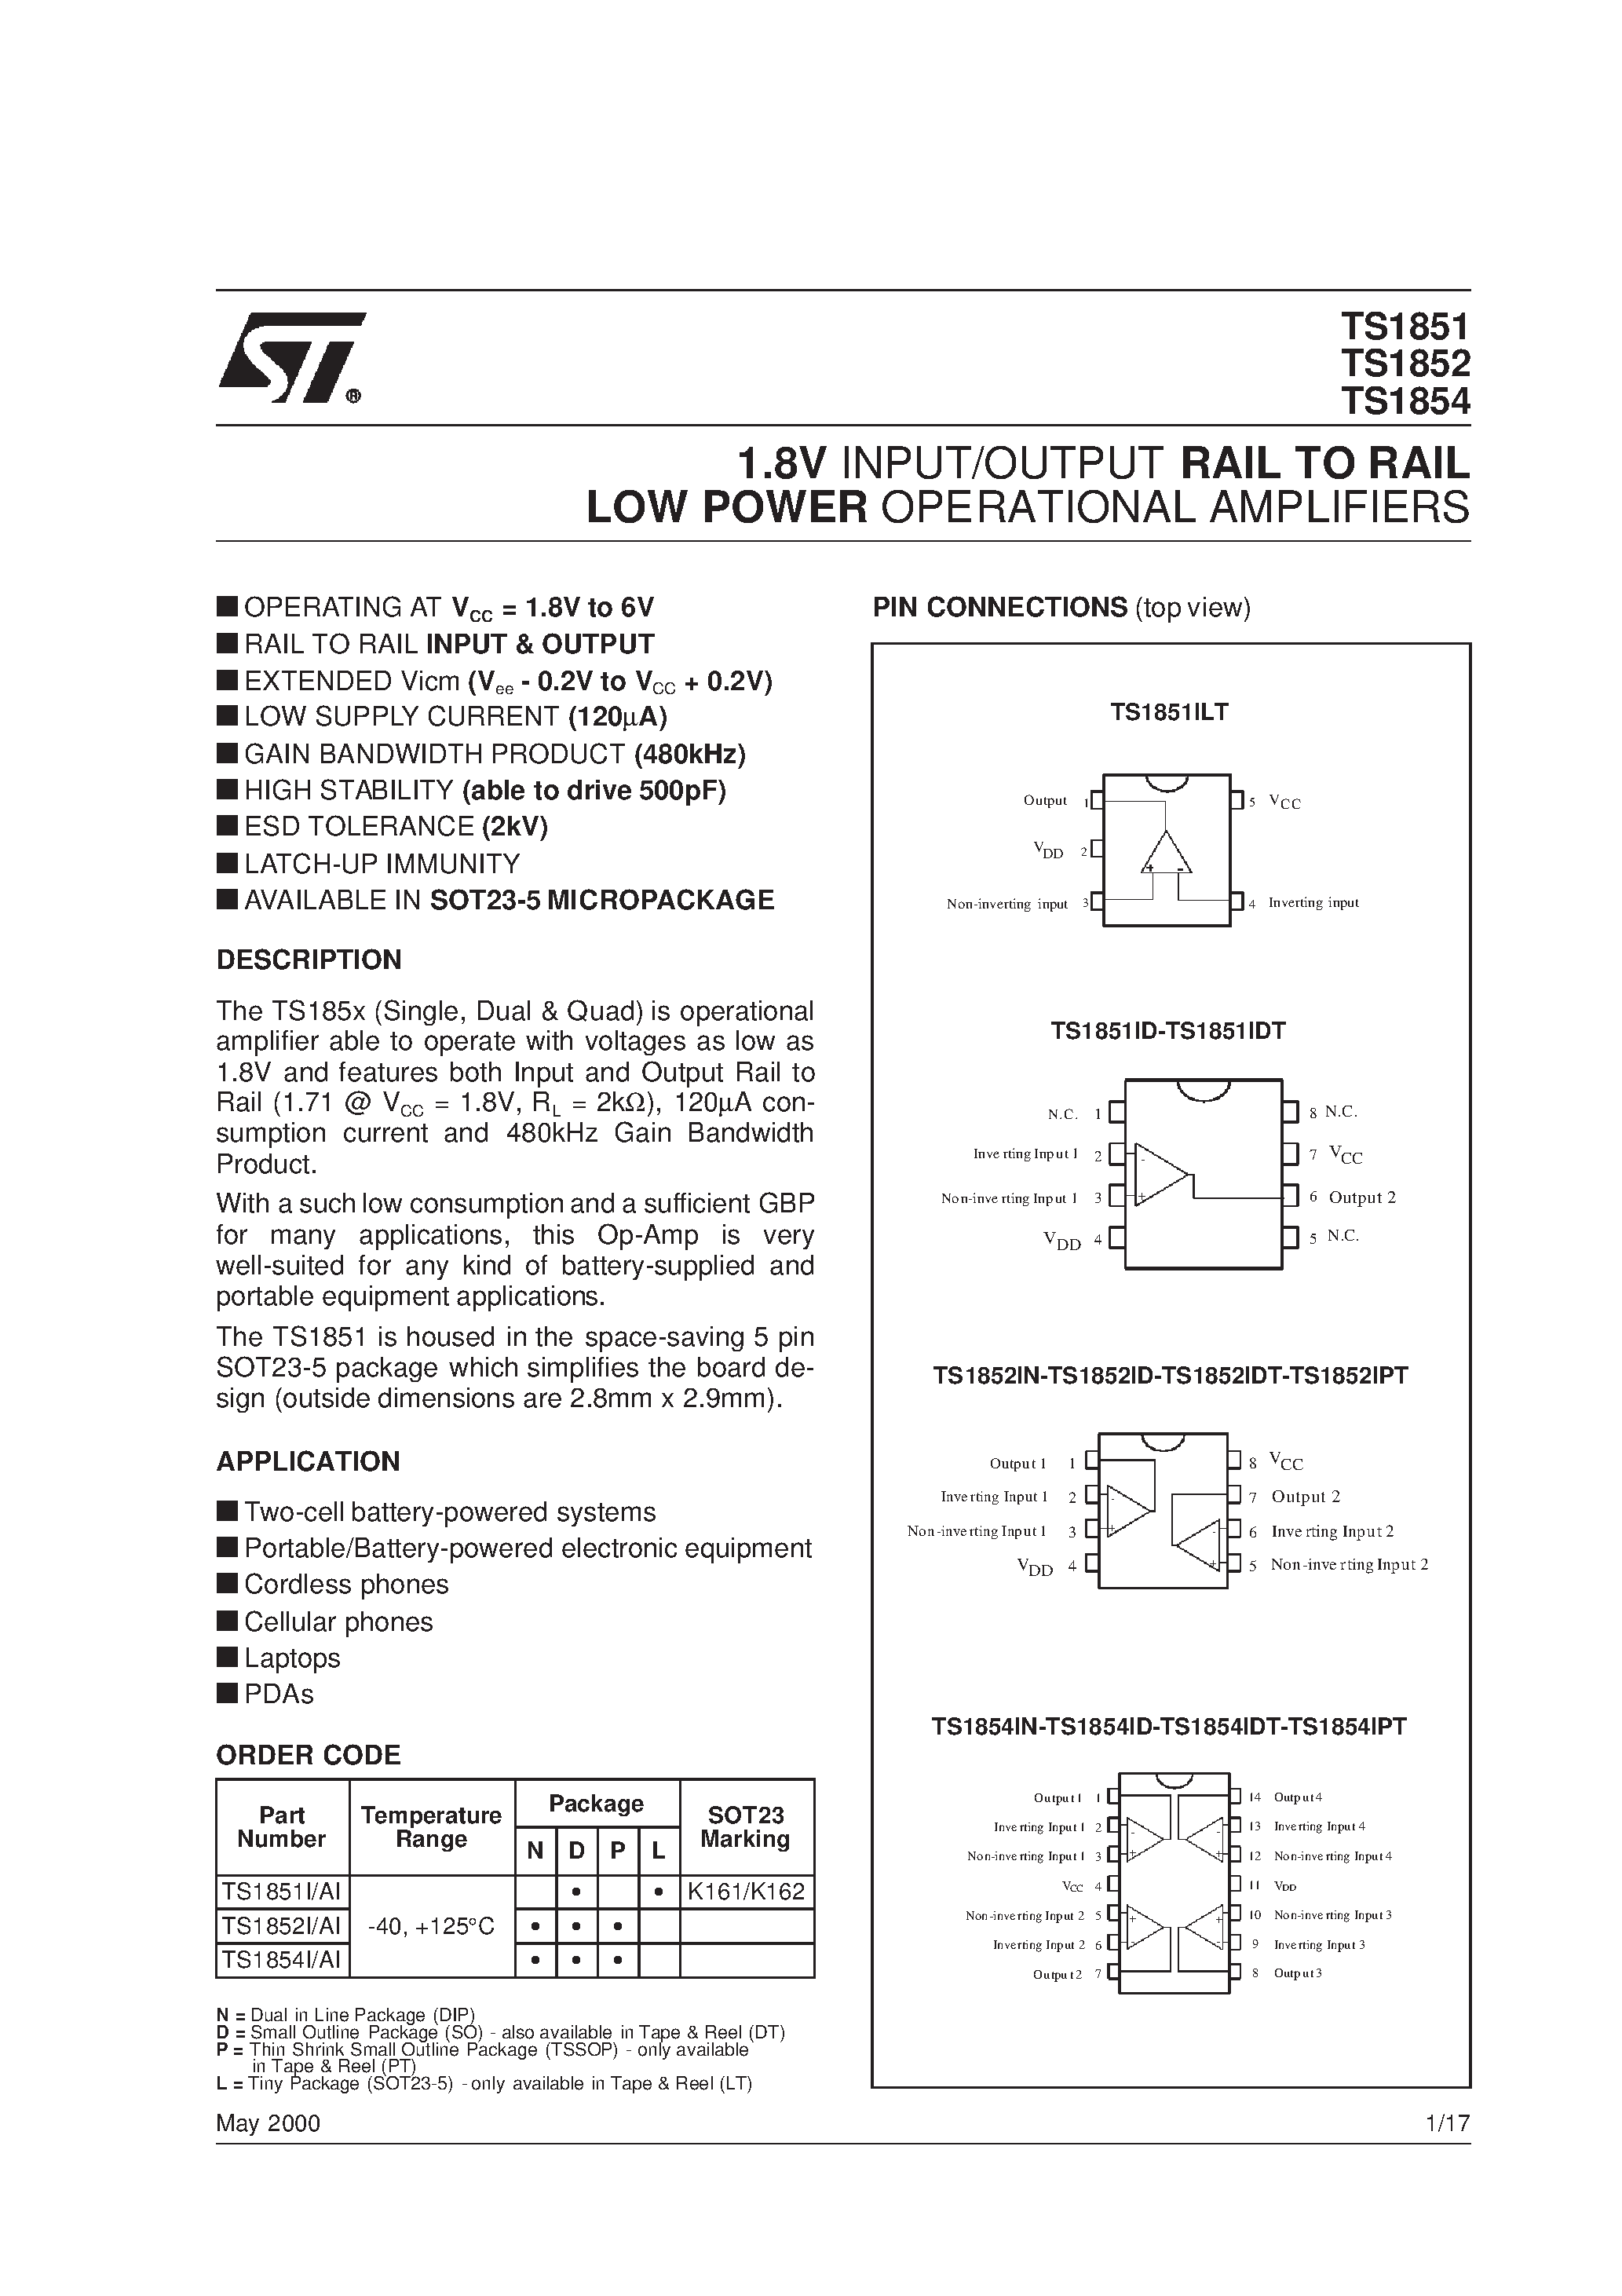 Datasheet TS1852 - 1.8V INPUT/OUTPUT RAIL TO RAIL LOW POWER OPERATIONAL AMPLIFIERS page 1